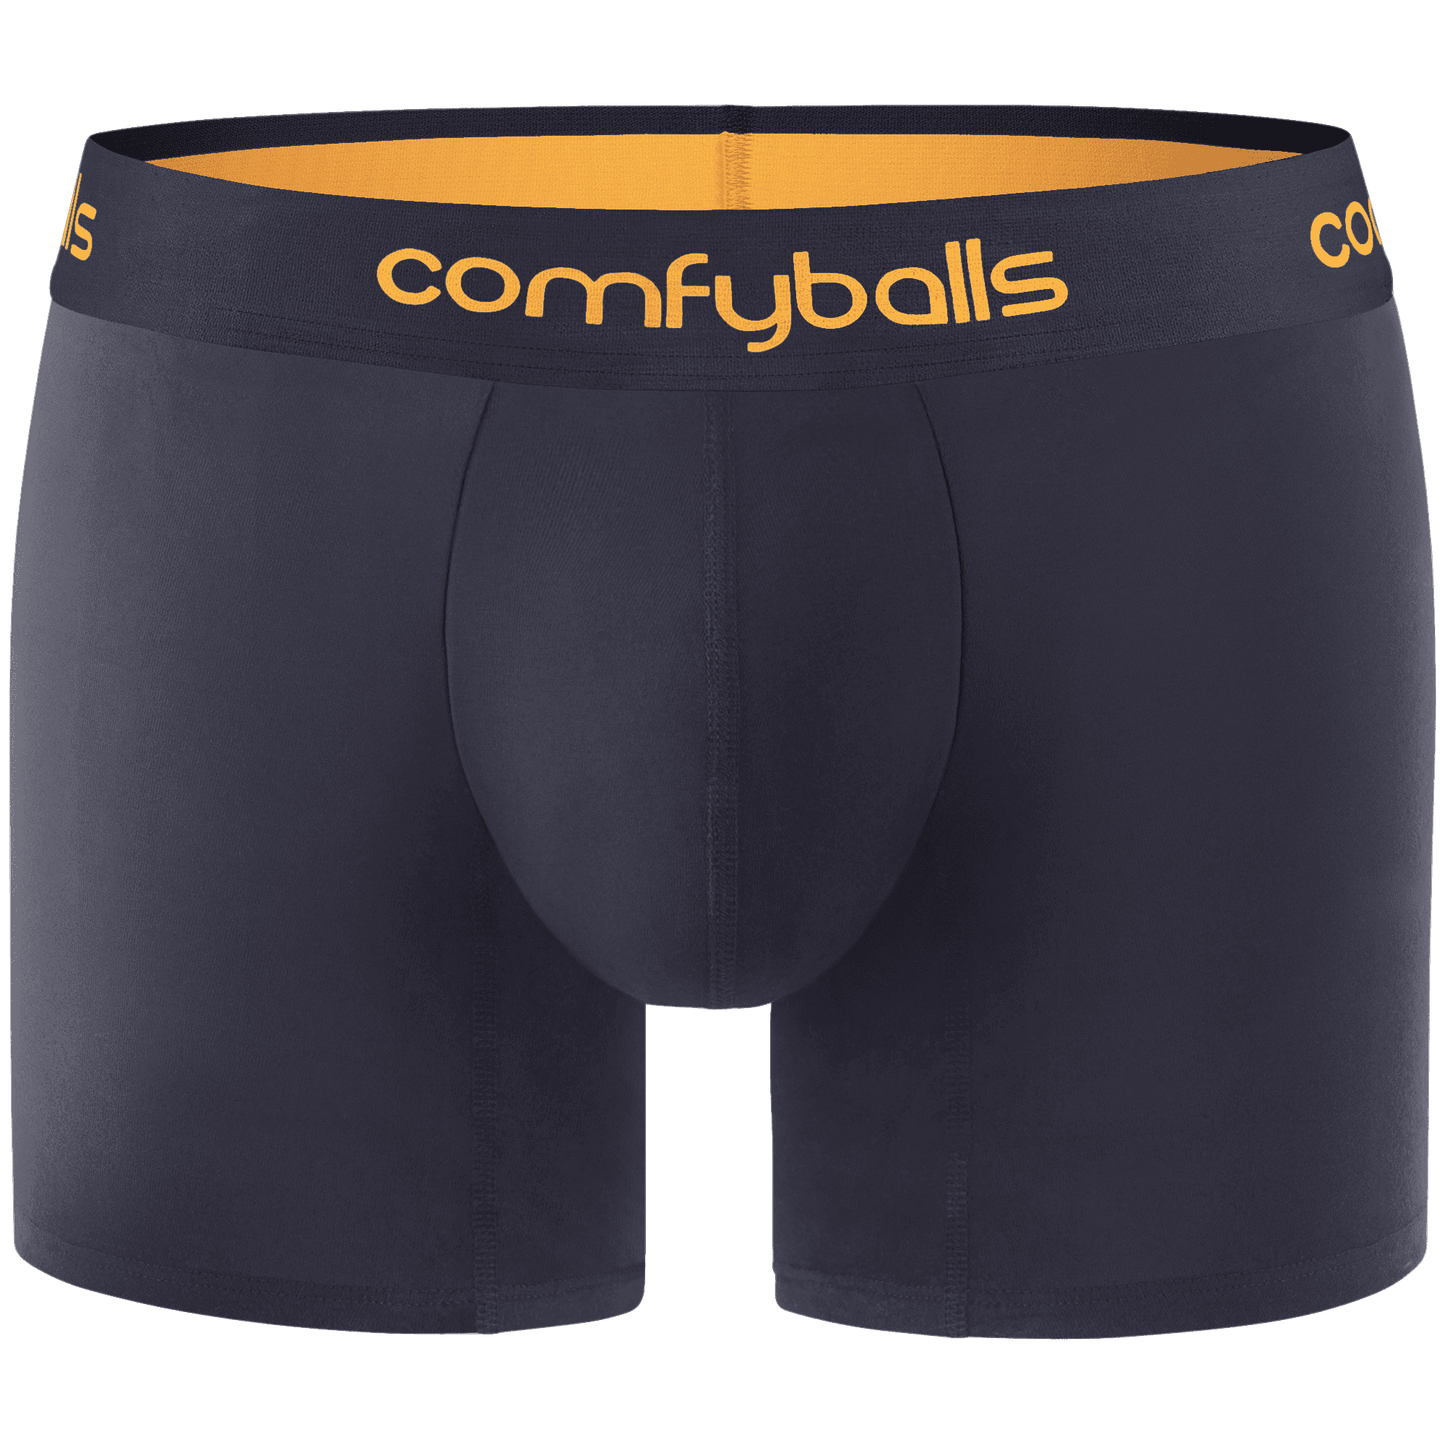 Products Long COTTON Charcoal Flame Orange Comfyballs boxer front view